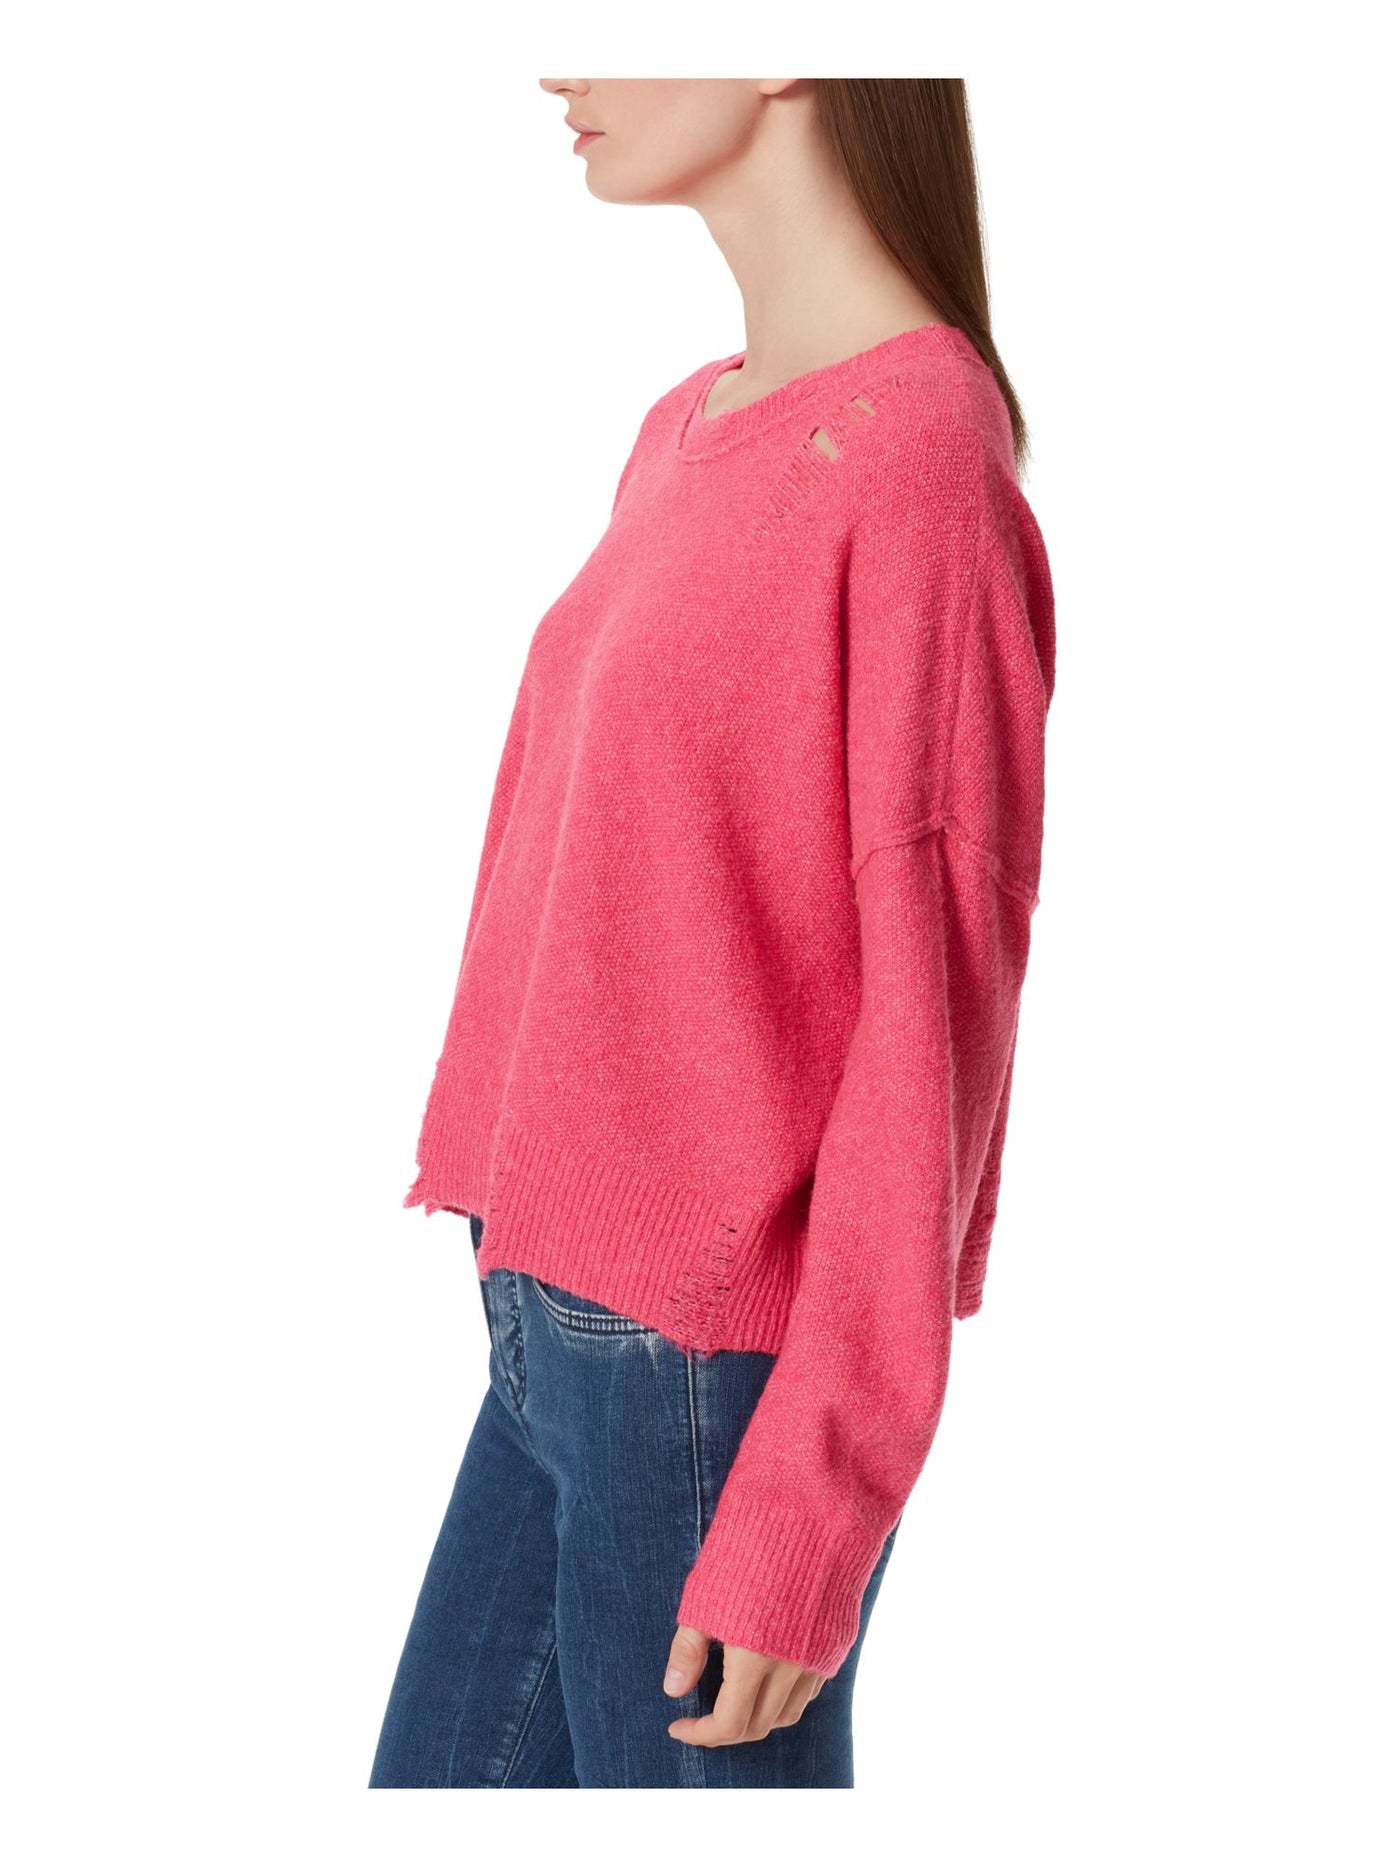 FRAYED JEANS Womens Pink Distressed Frayed Sheer Ribbed Heather Long Sleeve Crew Neck Sweater XL